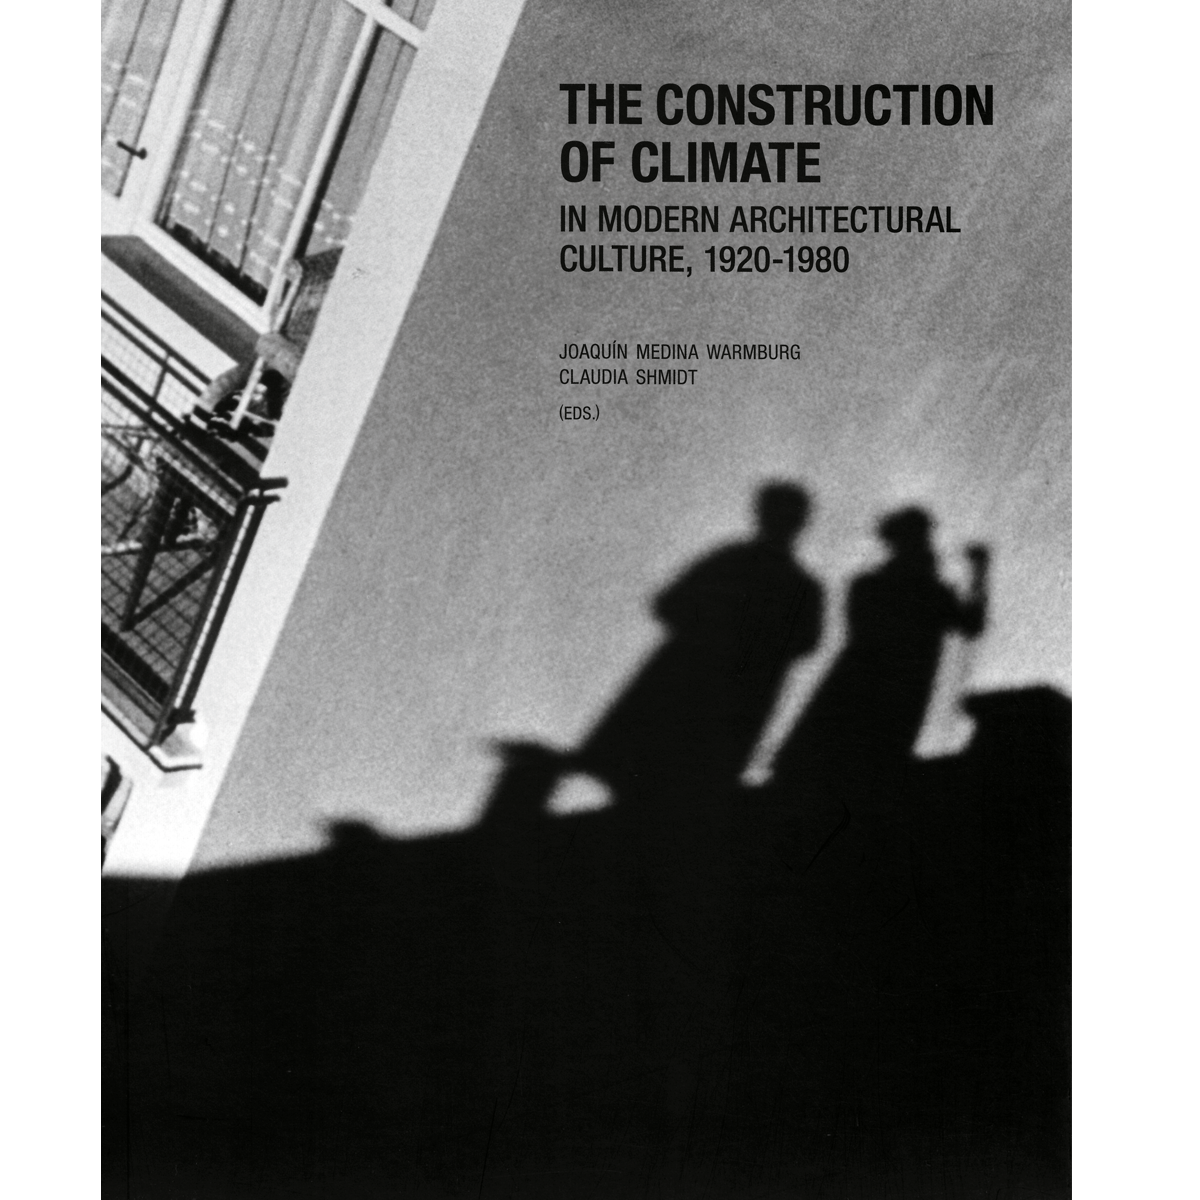 The Construction of Climate in Modern Architectural Culture (1920-1980)